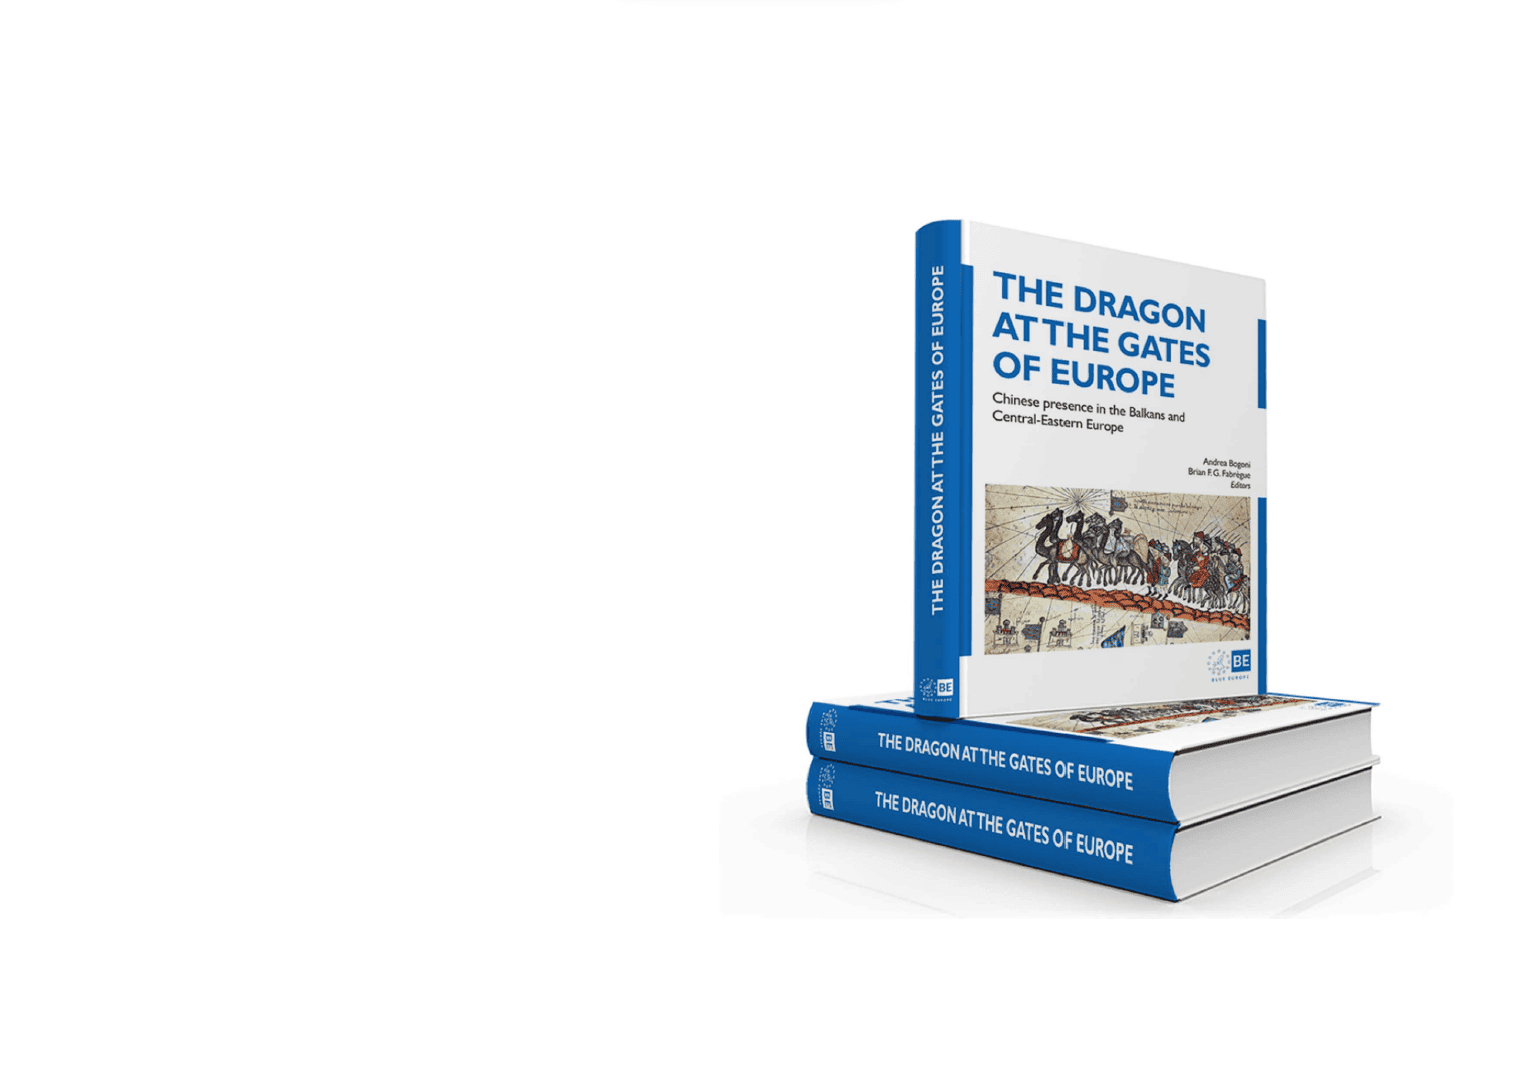 Announcing our new book: The Dragon at the Gates of Europe